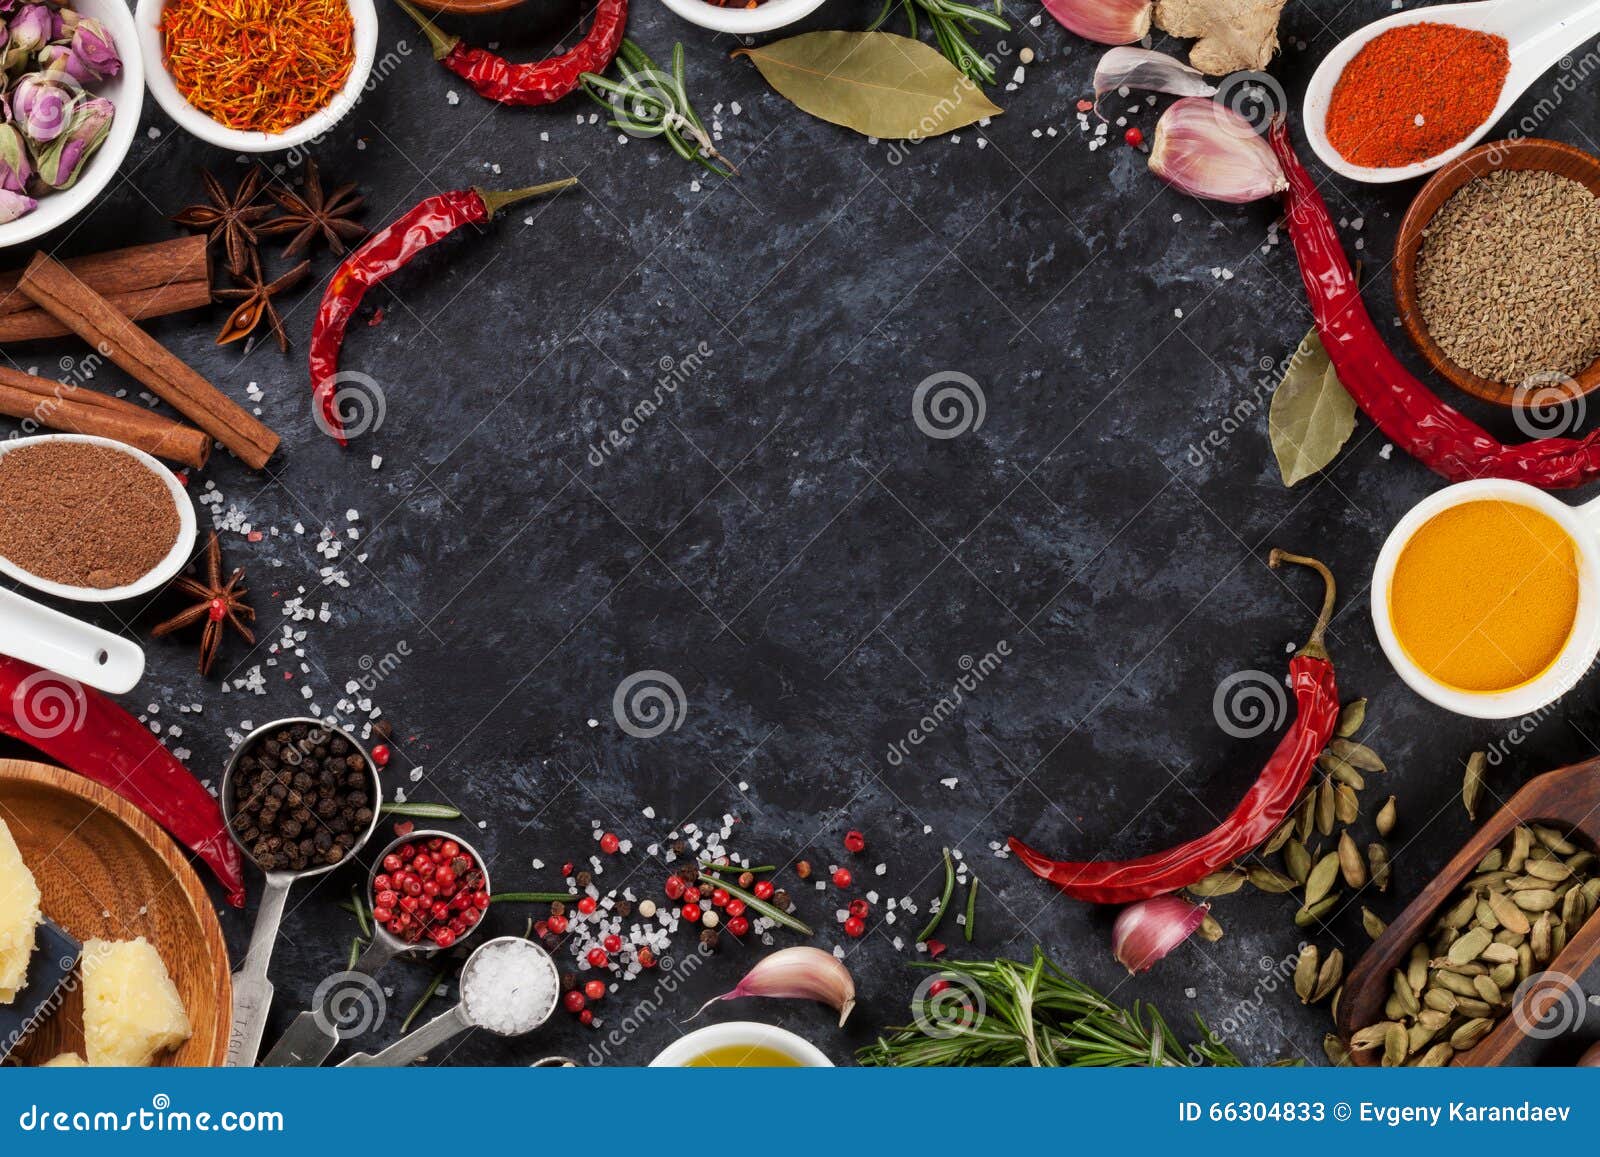 Herbs, Condiments and Spices Stock Image - Image of gourmet, colorful ...